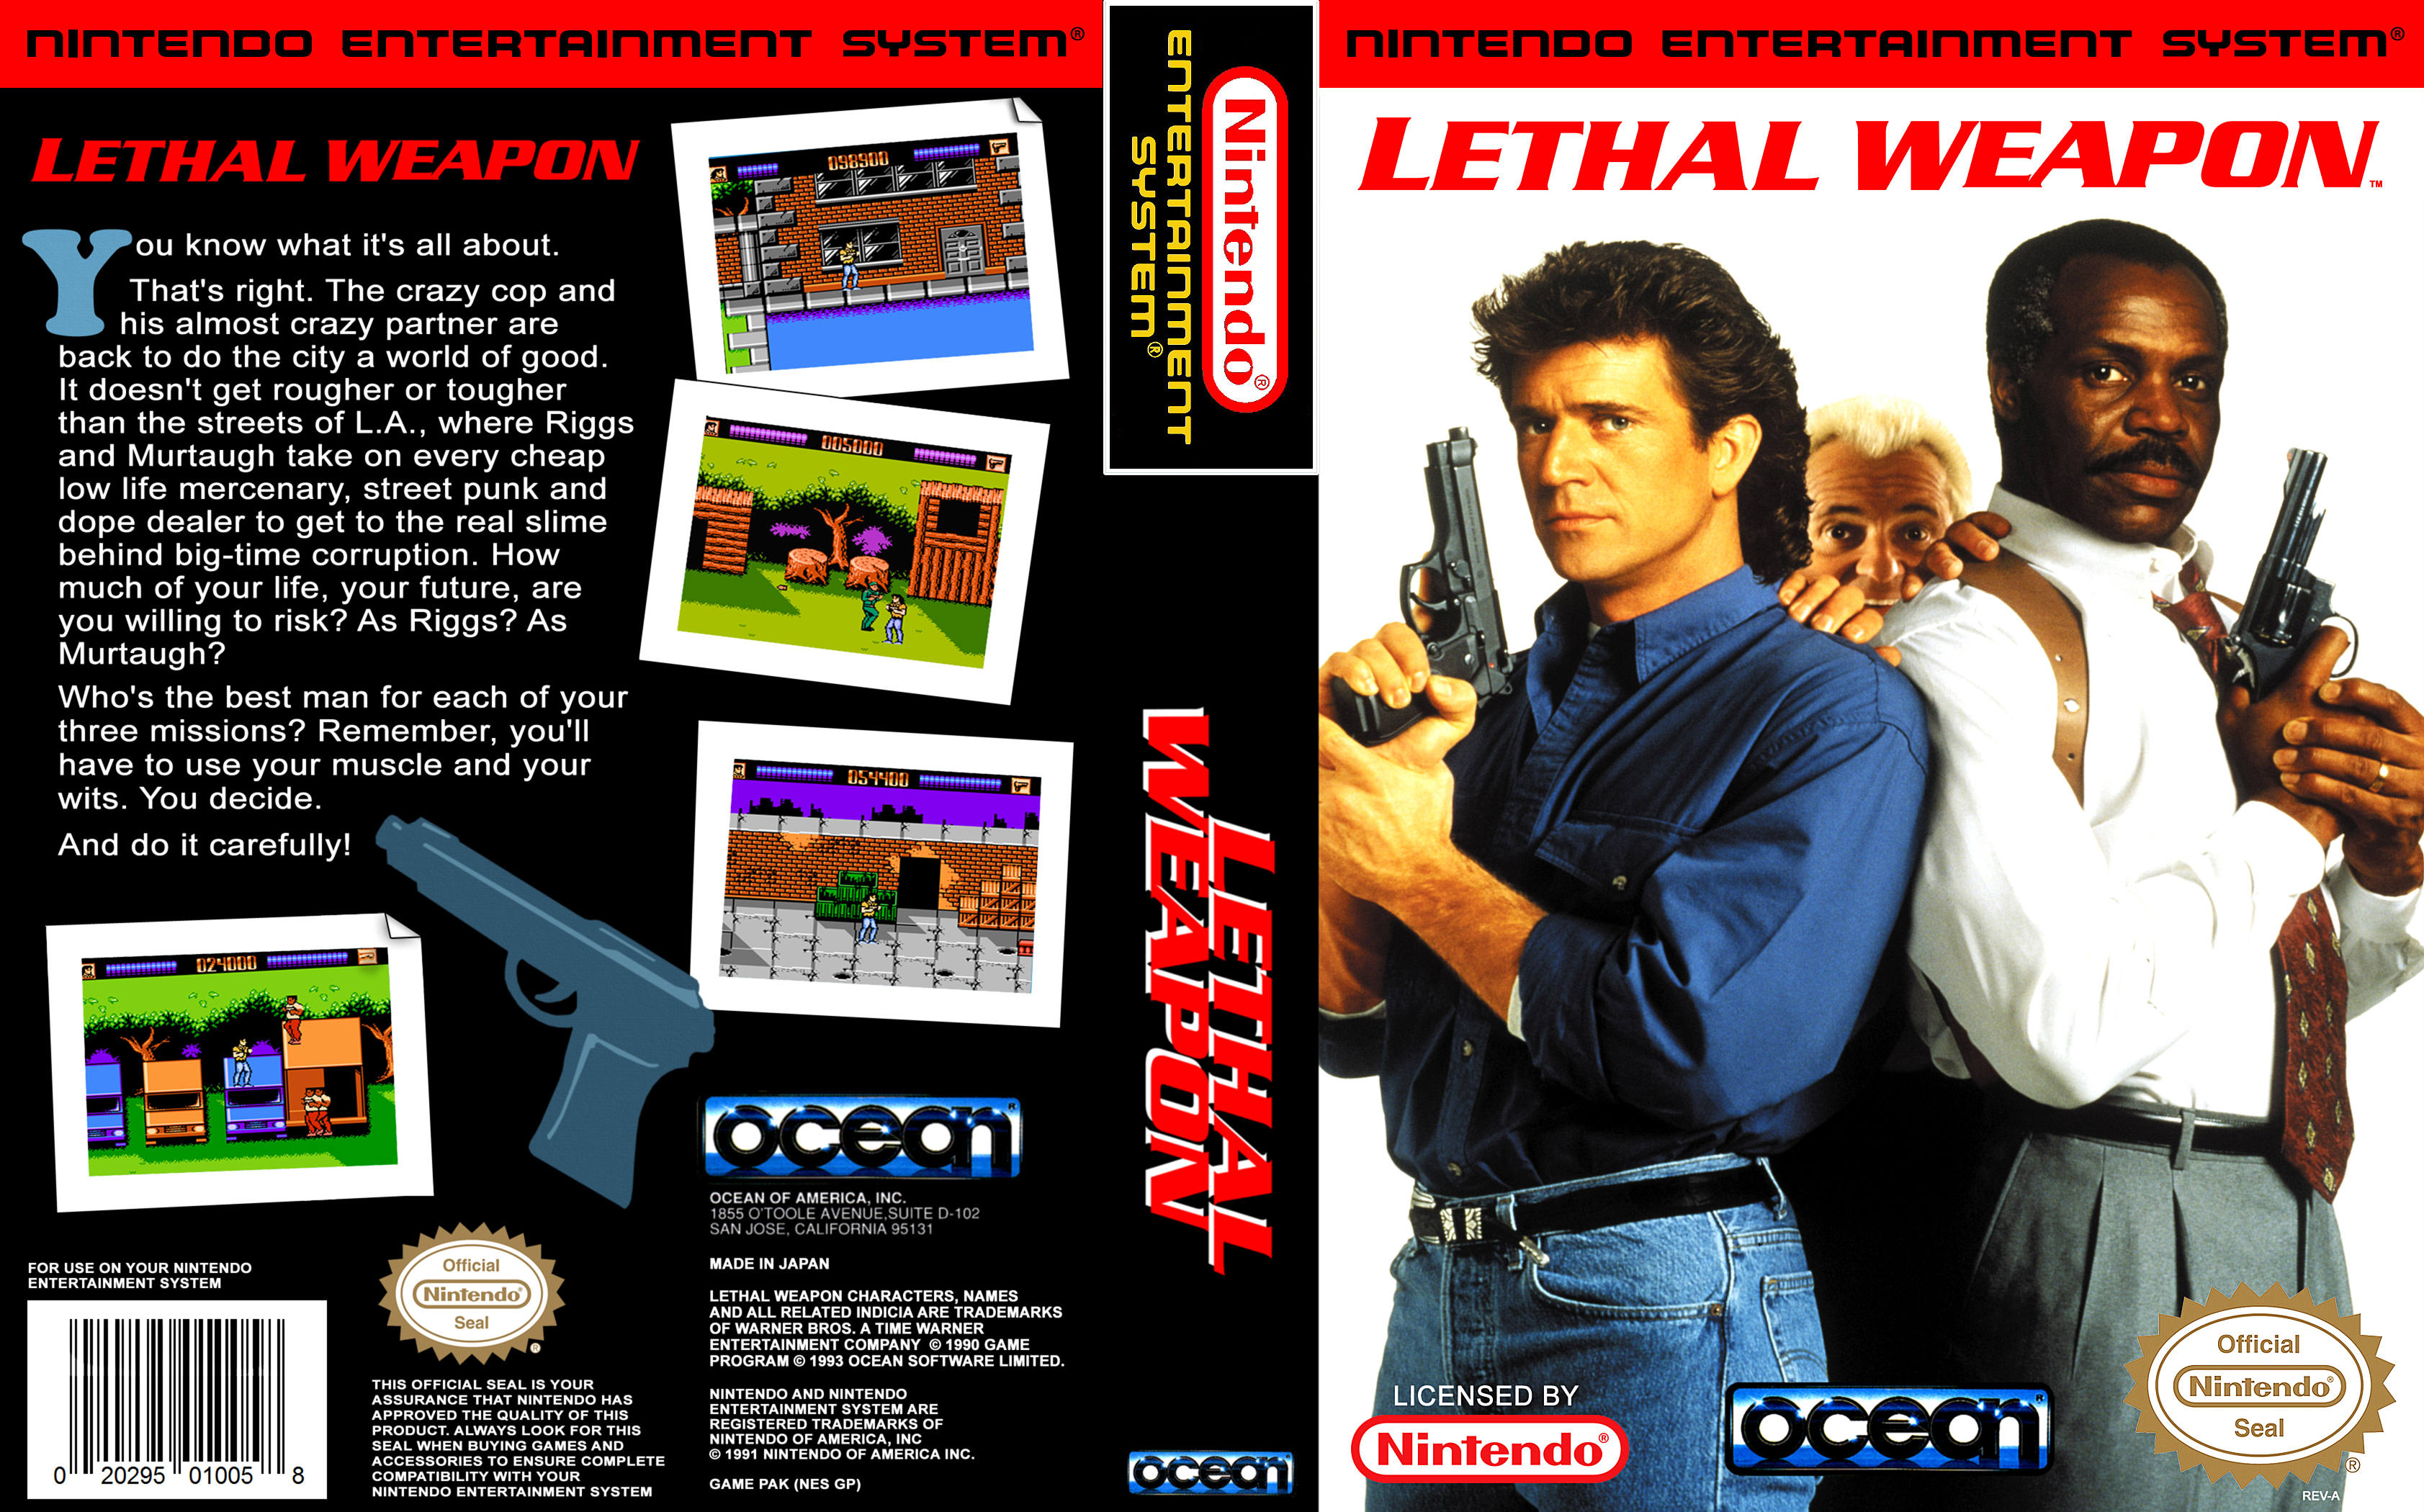 Lethal Weapon Денди. Lethal Weapon NES обложка. Dendy Lethal Weapon 2. Weapon игра Денди..